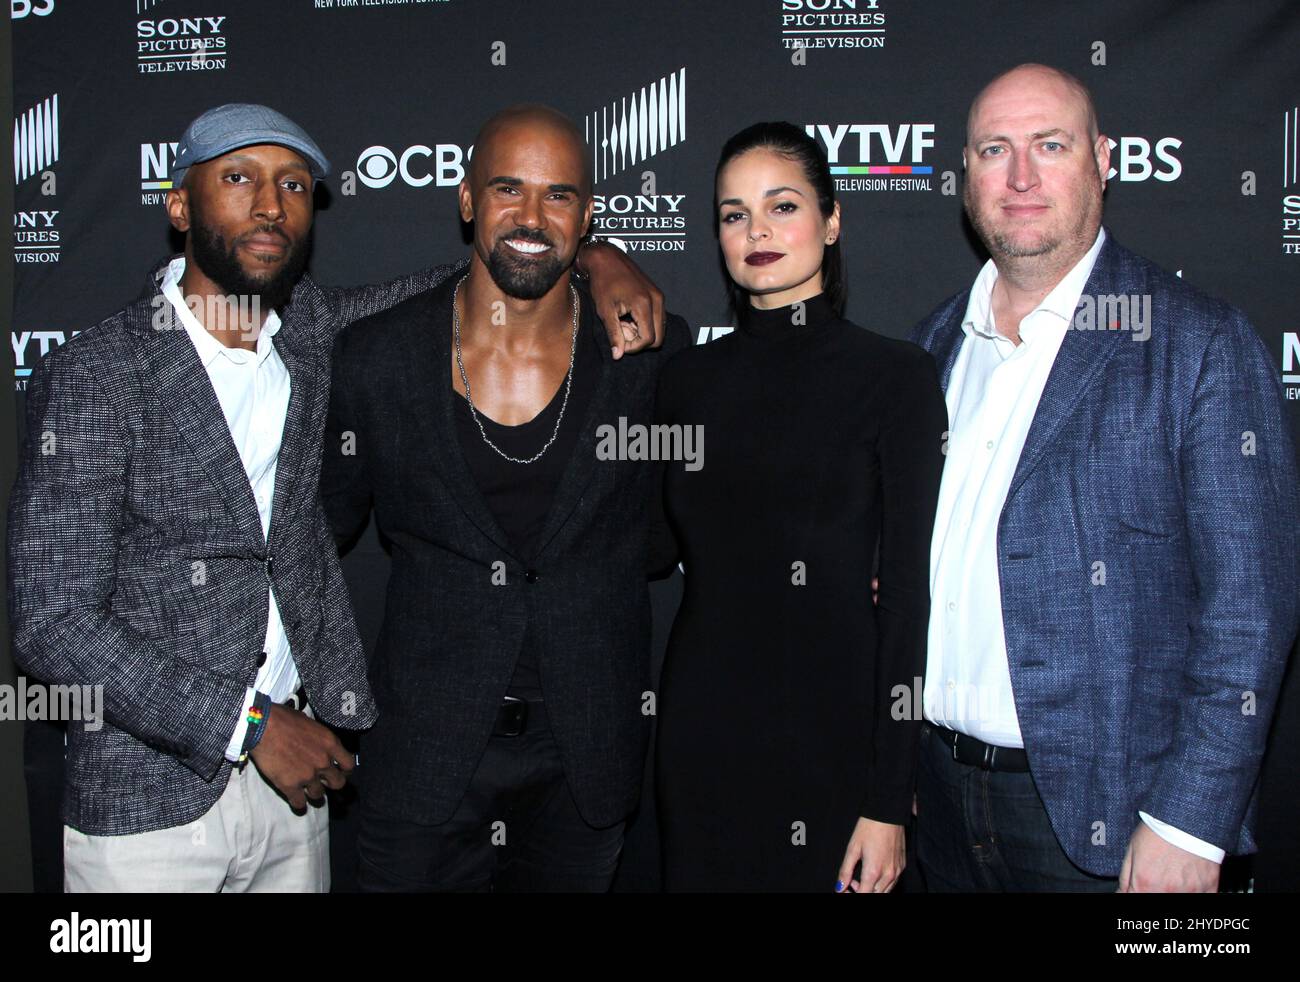 Aaron Rahsaan Thomas, Shemar Moore, Lina Esco & Shawn Ryan attends the S.W.A.T. World Premiere Held at the SVA Theatre on October 24, 2017 Stock Photo